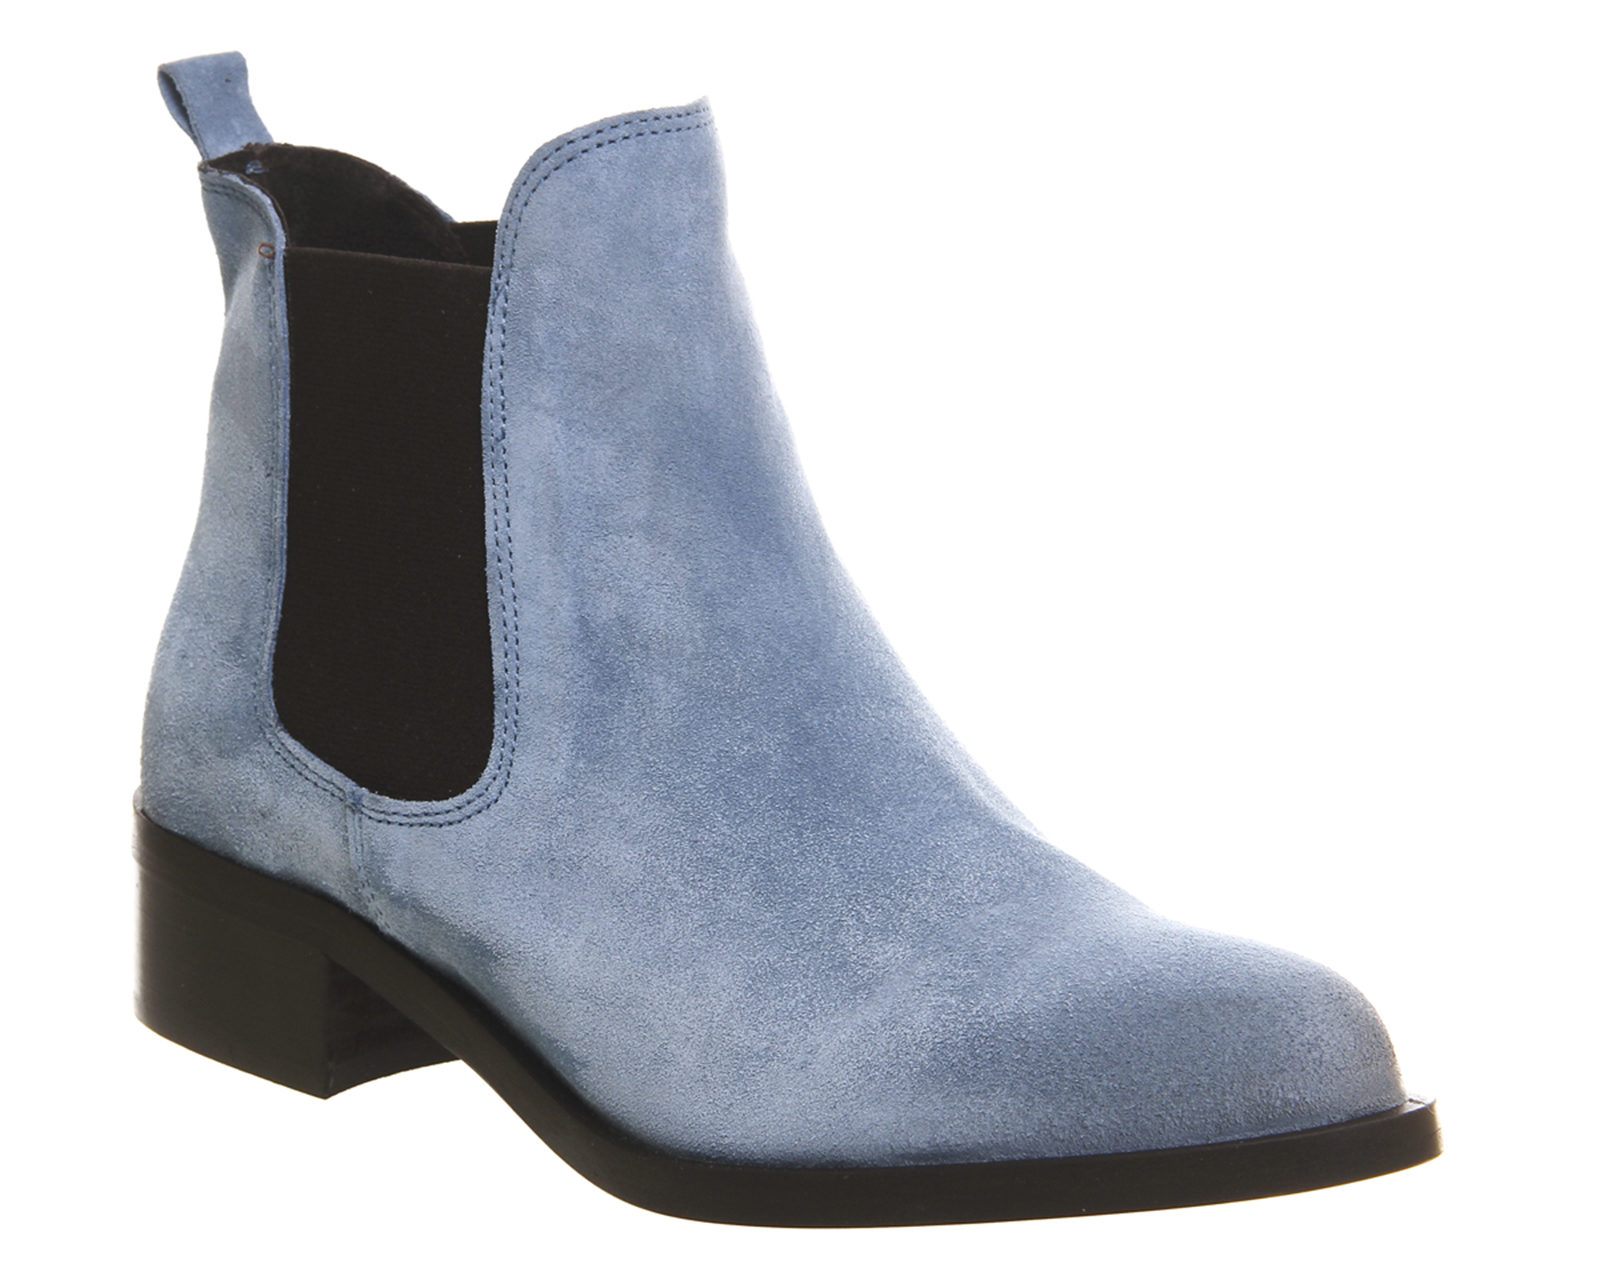 blue ankle boots uk